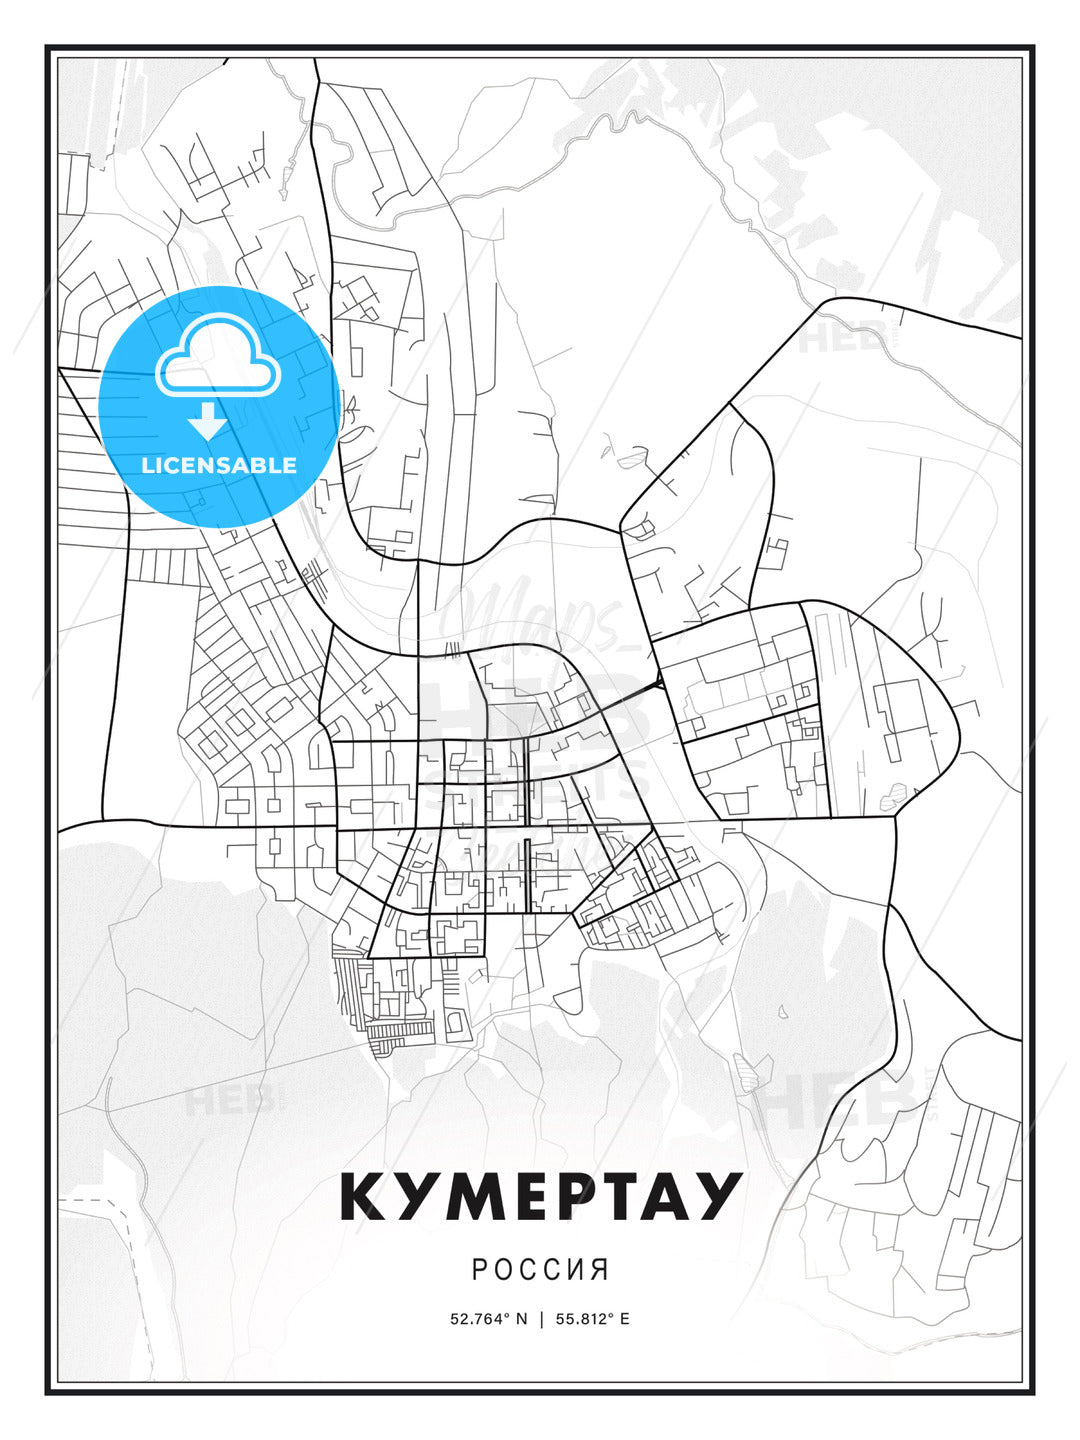 КУМЕРТАУ / Kumertau, Russia, Modern Print Template in Various Formats - HEBSTREITS Sketches